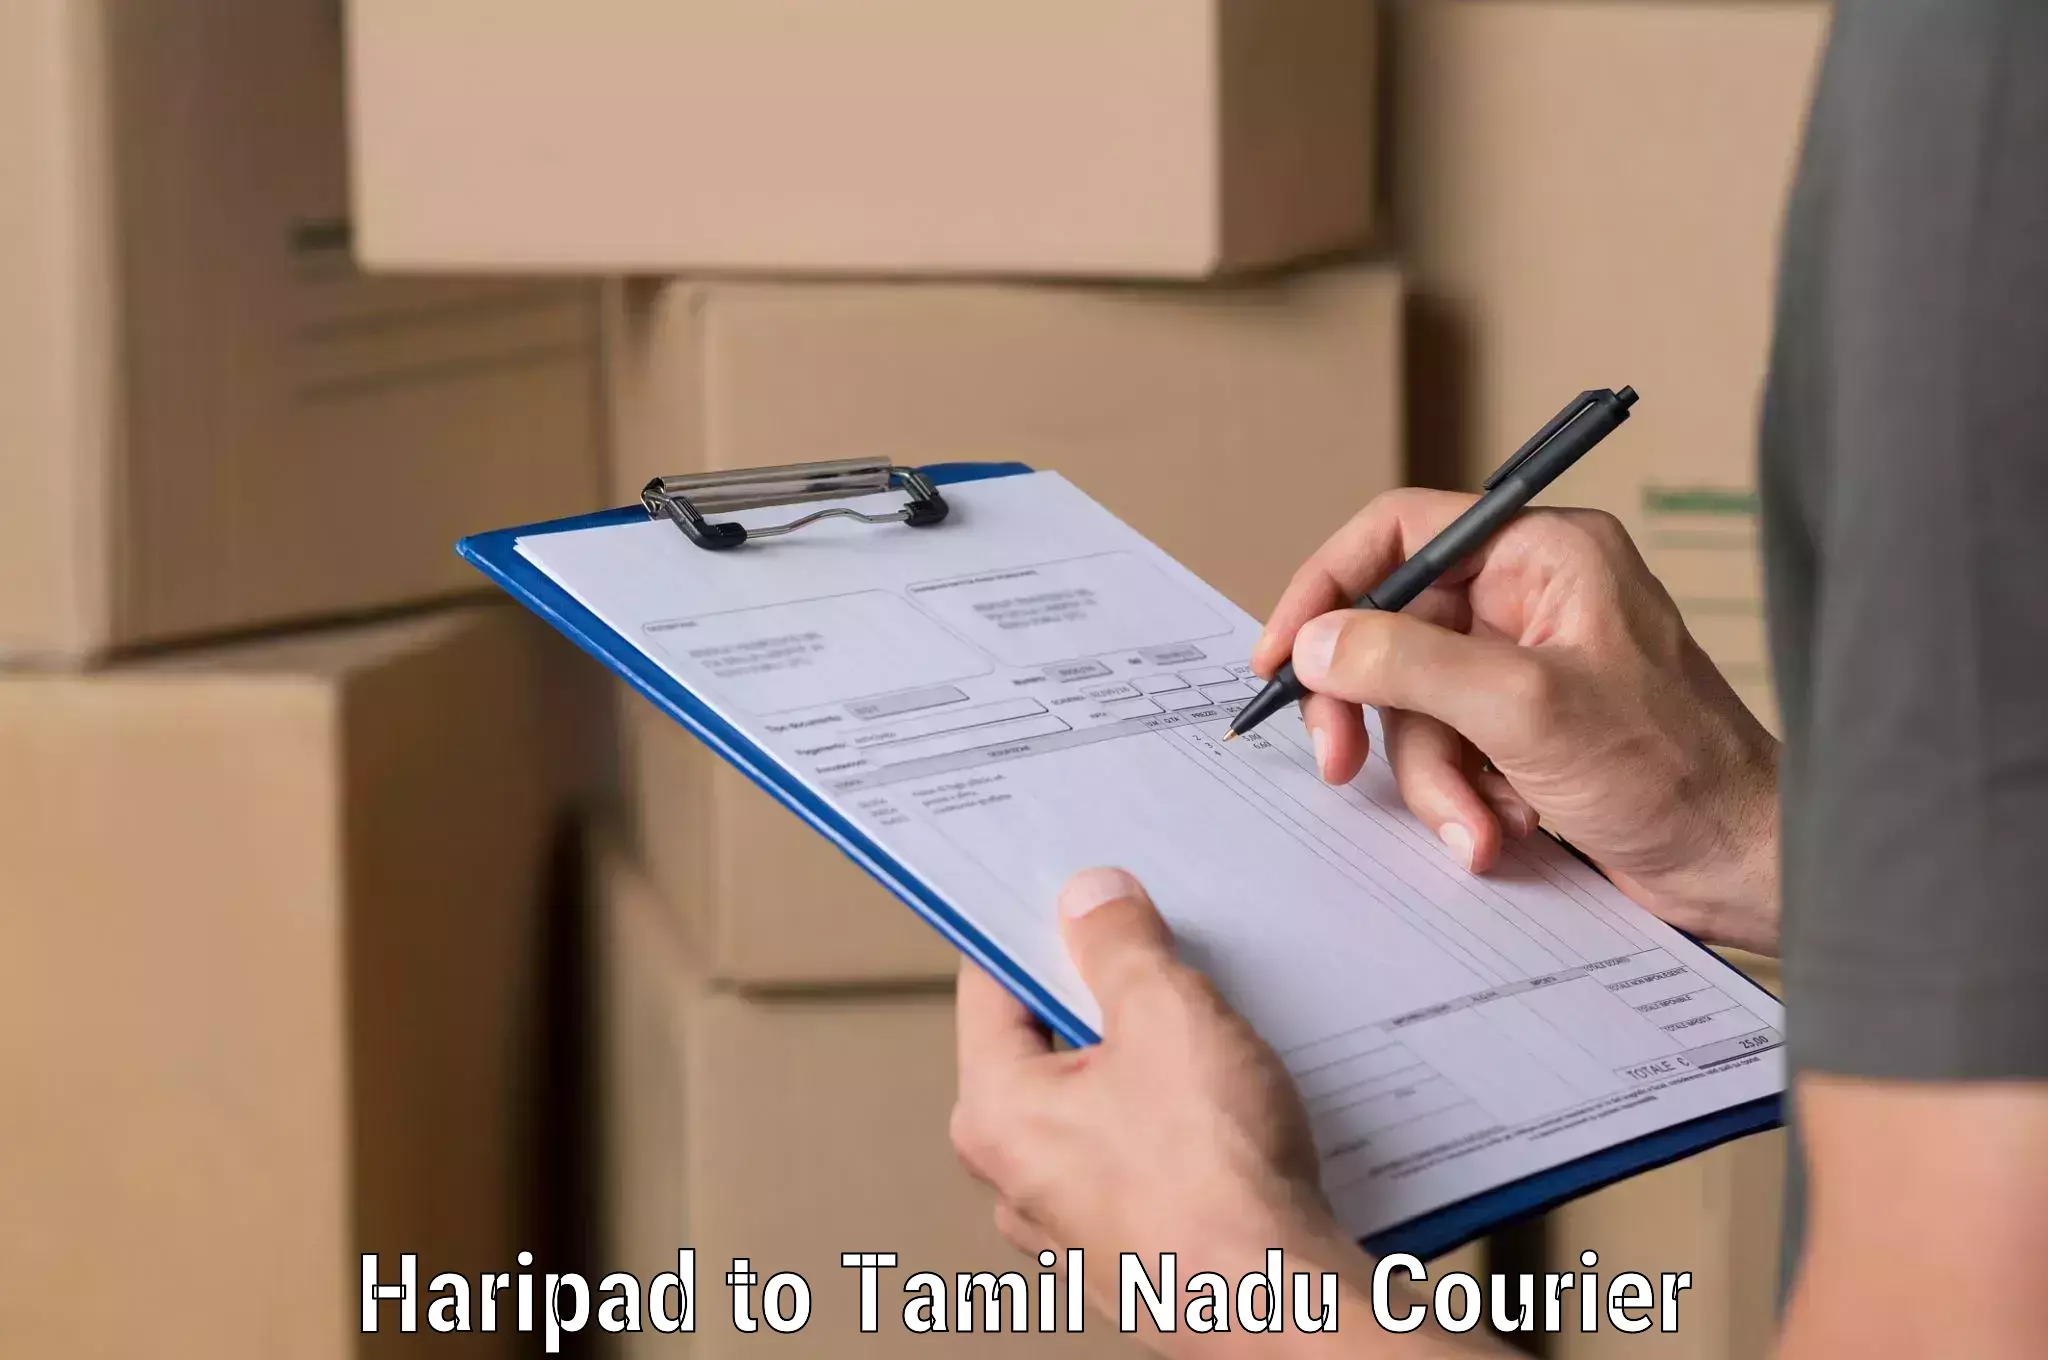 Budget-friendly shipping Haripad to Shanmugha Arts Science Technology and Research Academy Thanjavur